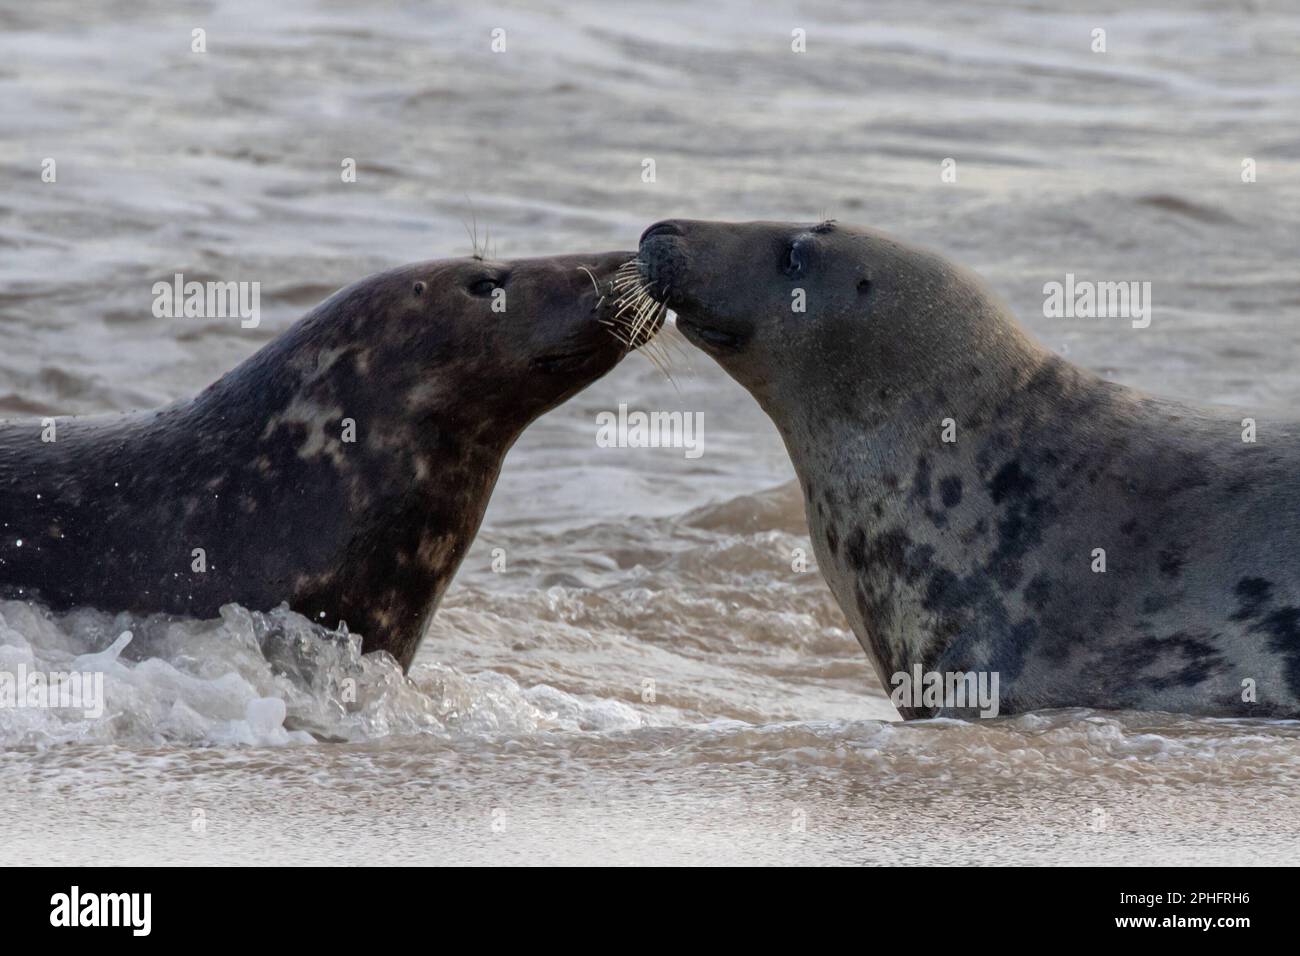 Kisses. Norfolk, UK: THESE COMICAL images show a Norfolk seal pulling funny faces including an impression of Homer Simpson?s famous ?Doh!? gesture wit Stock Photo